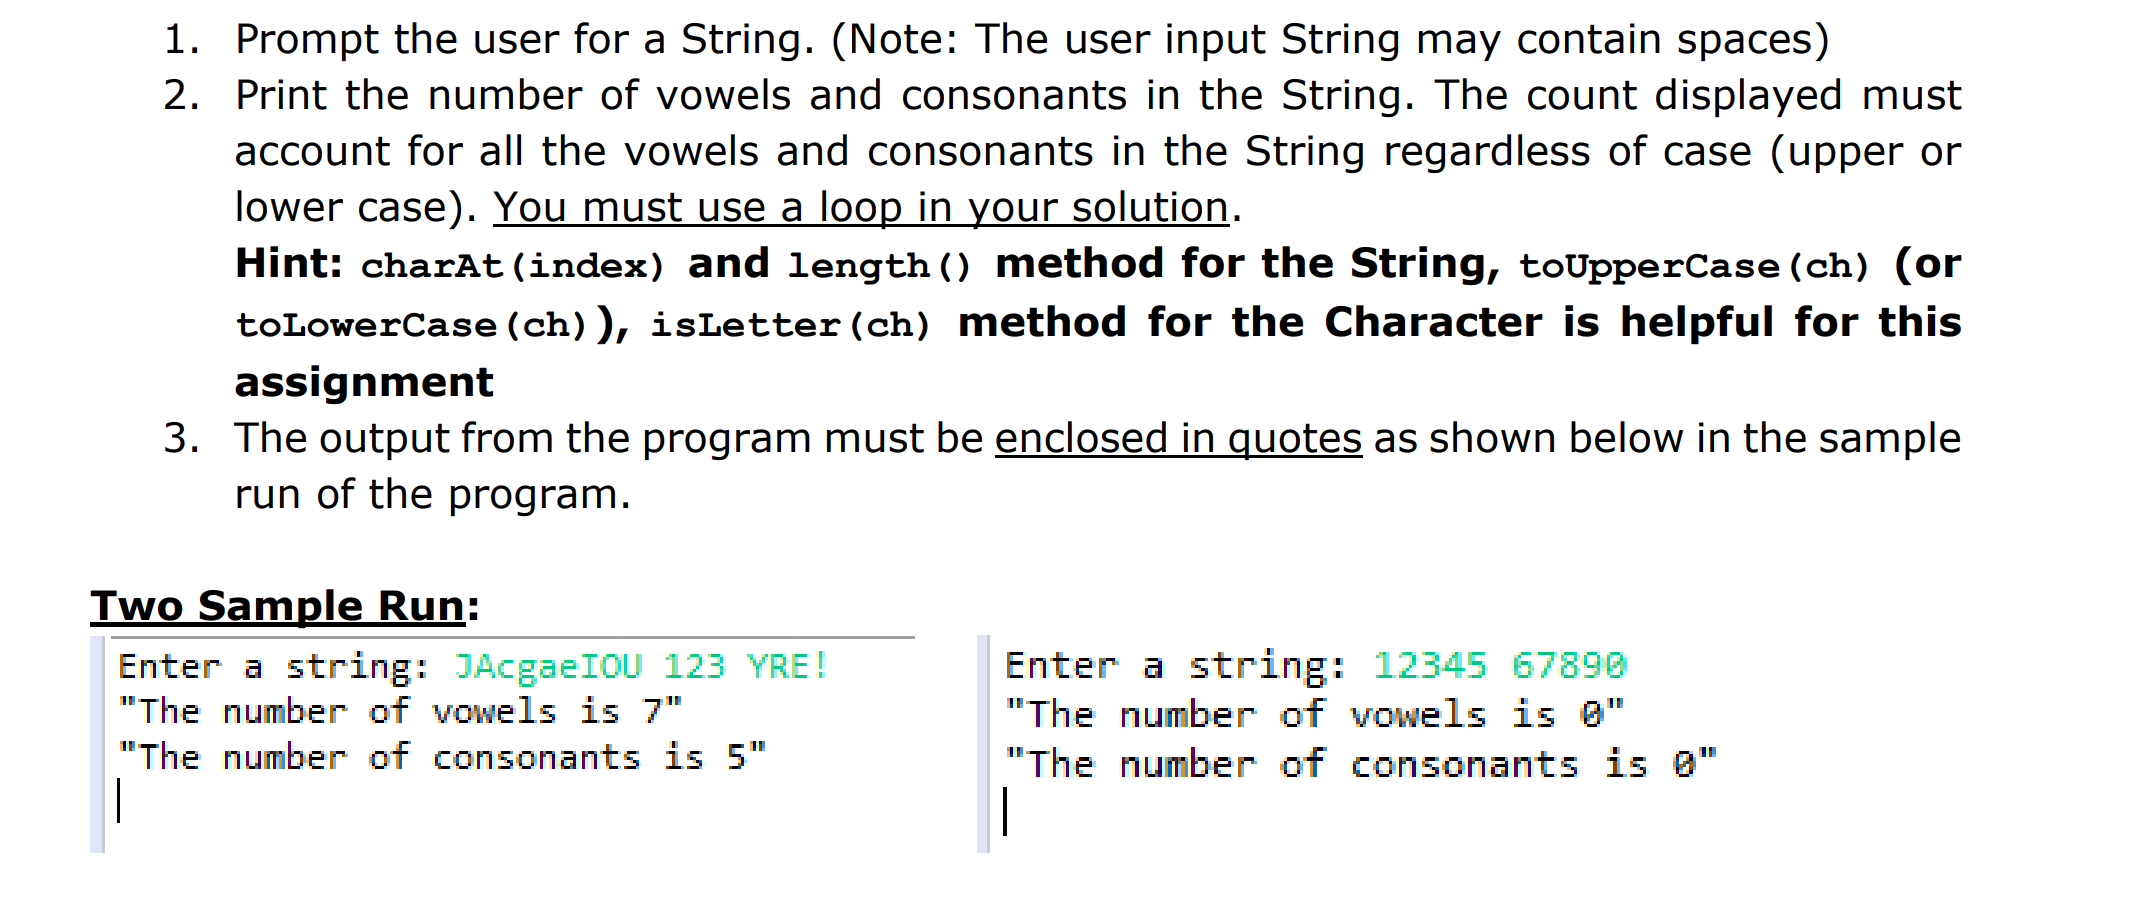 1. Prompt the user for a String. (Note: The user input String may contain spaces)
2. Print the number of vowels and consonants in the String. The count displayed must
account for all the vowels and consonants in the String regardless of case (upper or
lower case). You must use a loop in your solution
Hint: charAt (index) and length ) method for the String, toUpperCase (ch) (or
toLowerCase (ch) ), isLetter (ch) method for the Character is helpful for this
assignment
3. The output from the program must be enclosed in quotes as shown below in the sample
run of the program
Two Sample Run:
Enter a string: JAcgaeIOU 123 YRE!
The number oT VOWels 15
"The number of consonants is 5"
Enter a string: 12345 67890
The number oT VOwels 15
"The number of consonants is Q"
